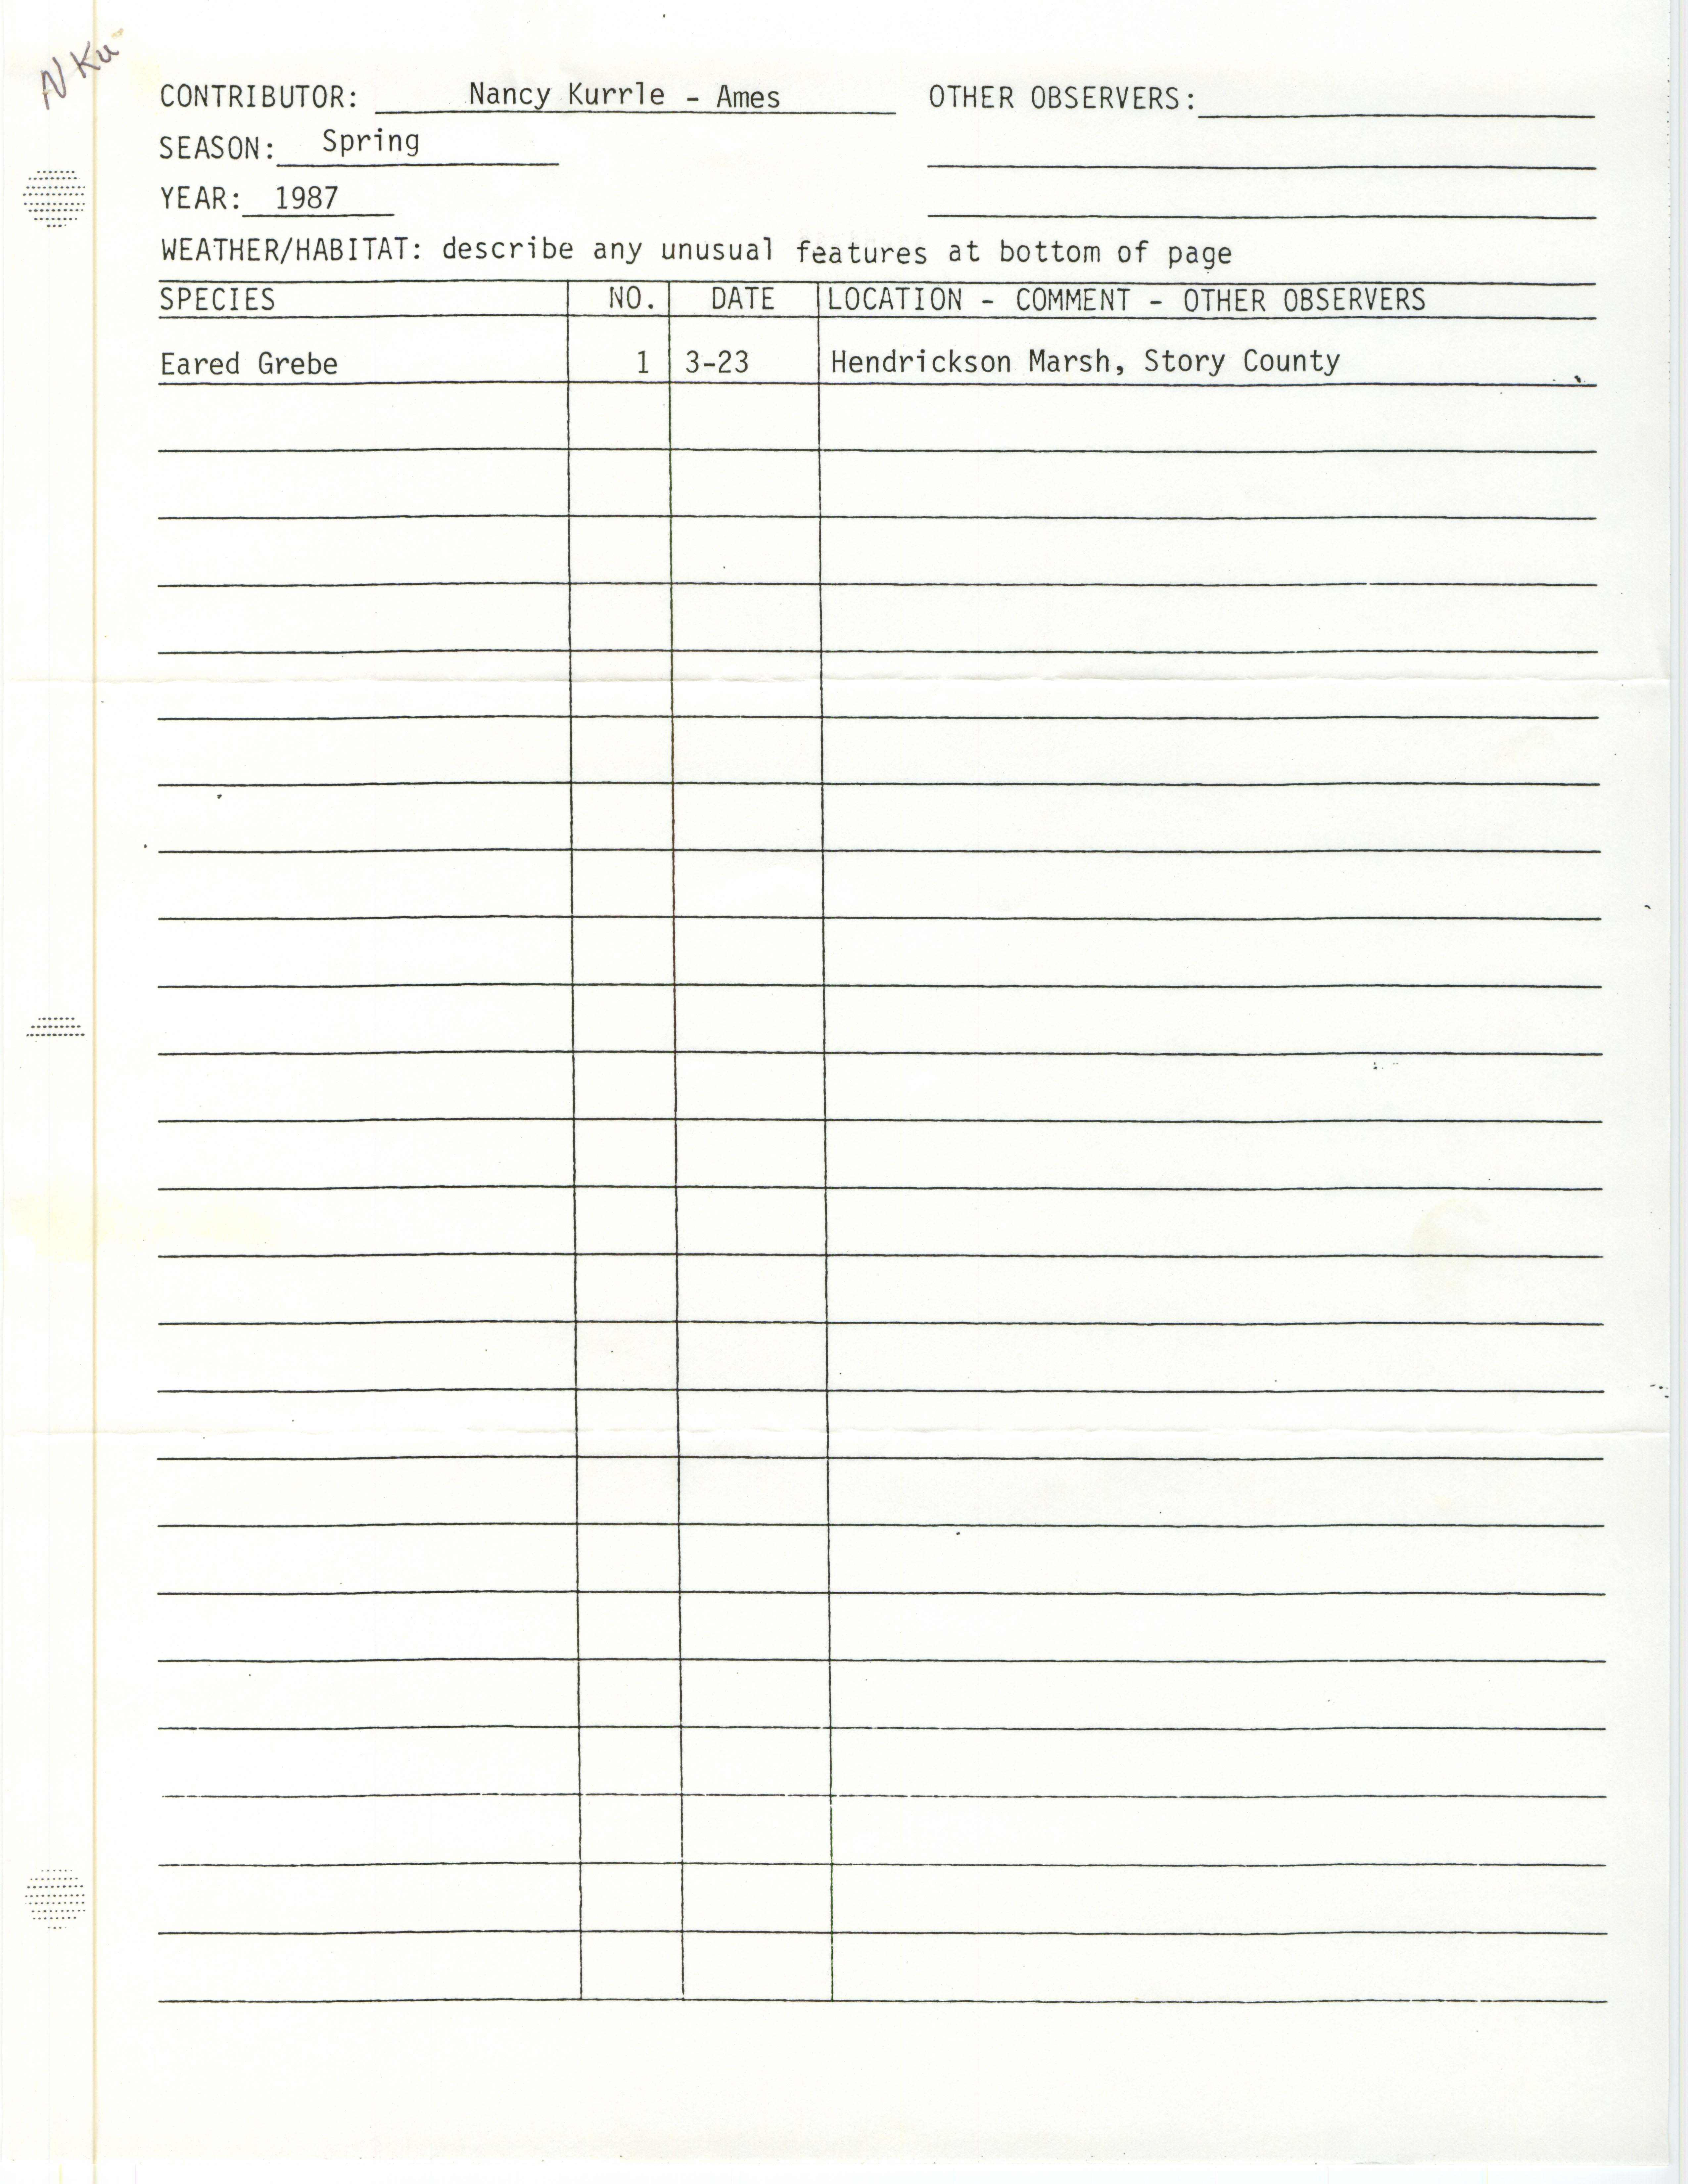 Field notes contributed by Nancy Kurrle, spring 1987